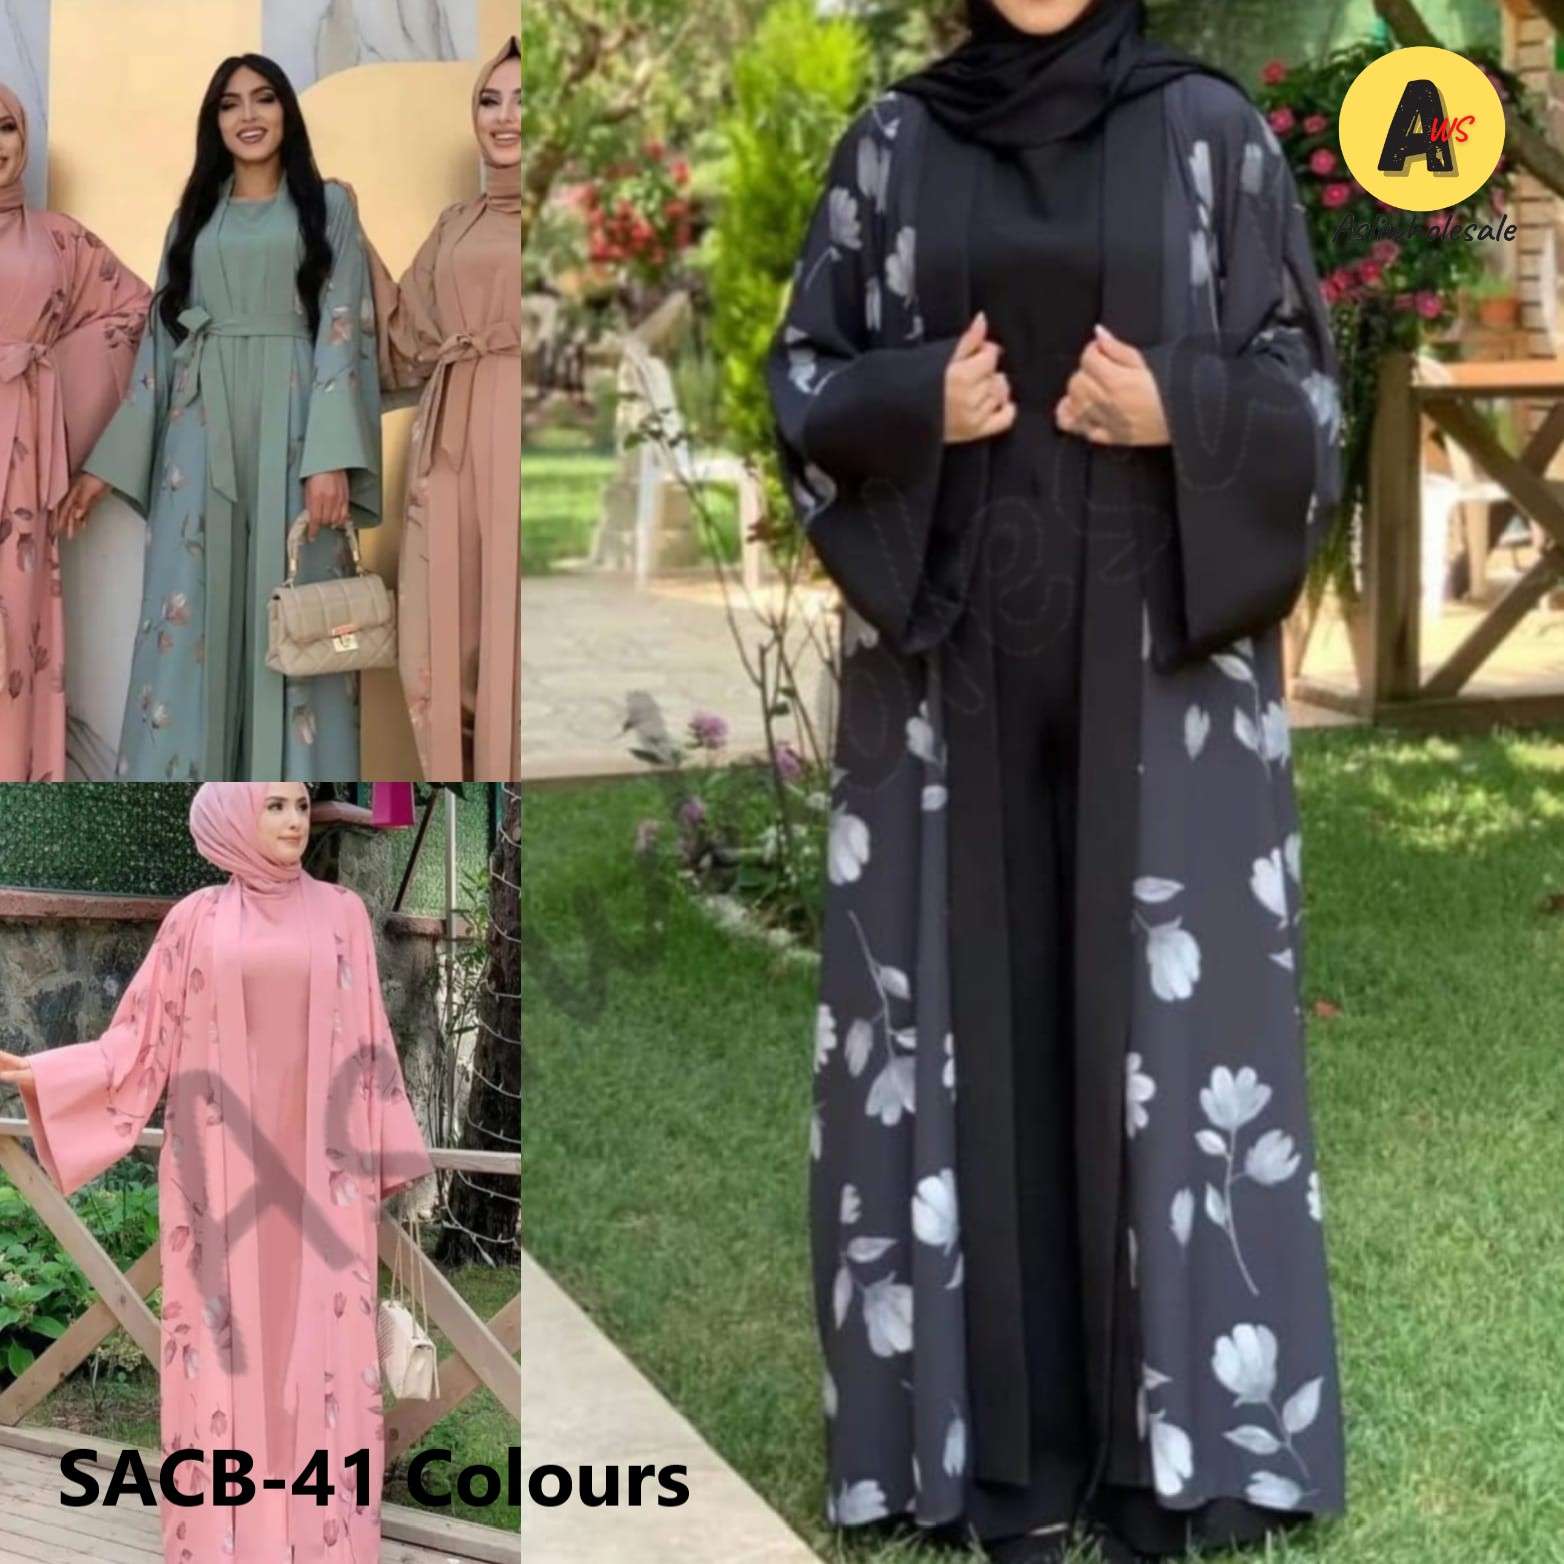 SACB-41 COLOURS BY ASLIWHOLESALE PRINTED GEORGETTE FABRIC BURQAS